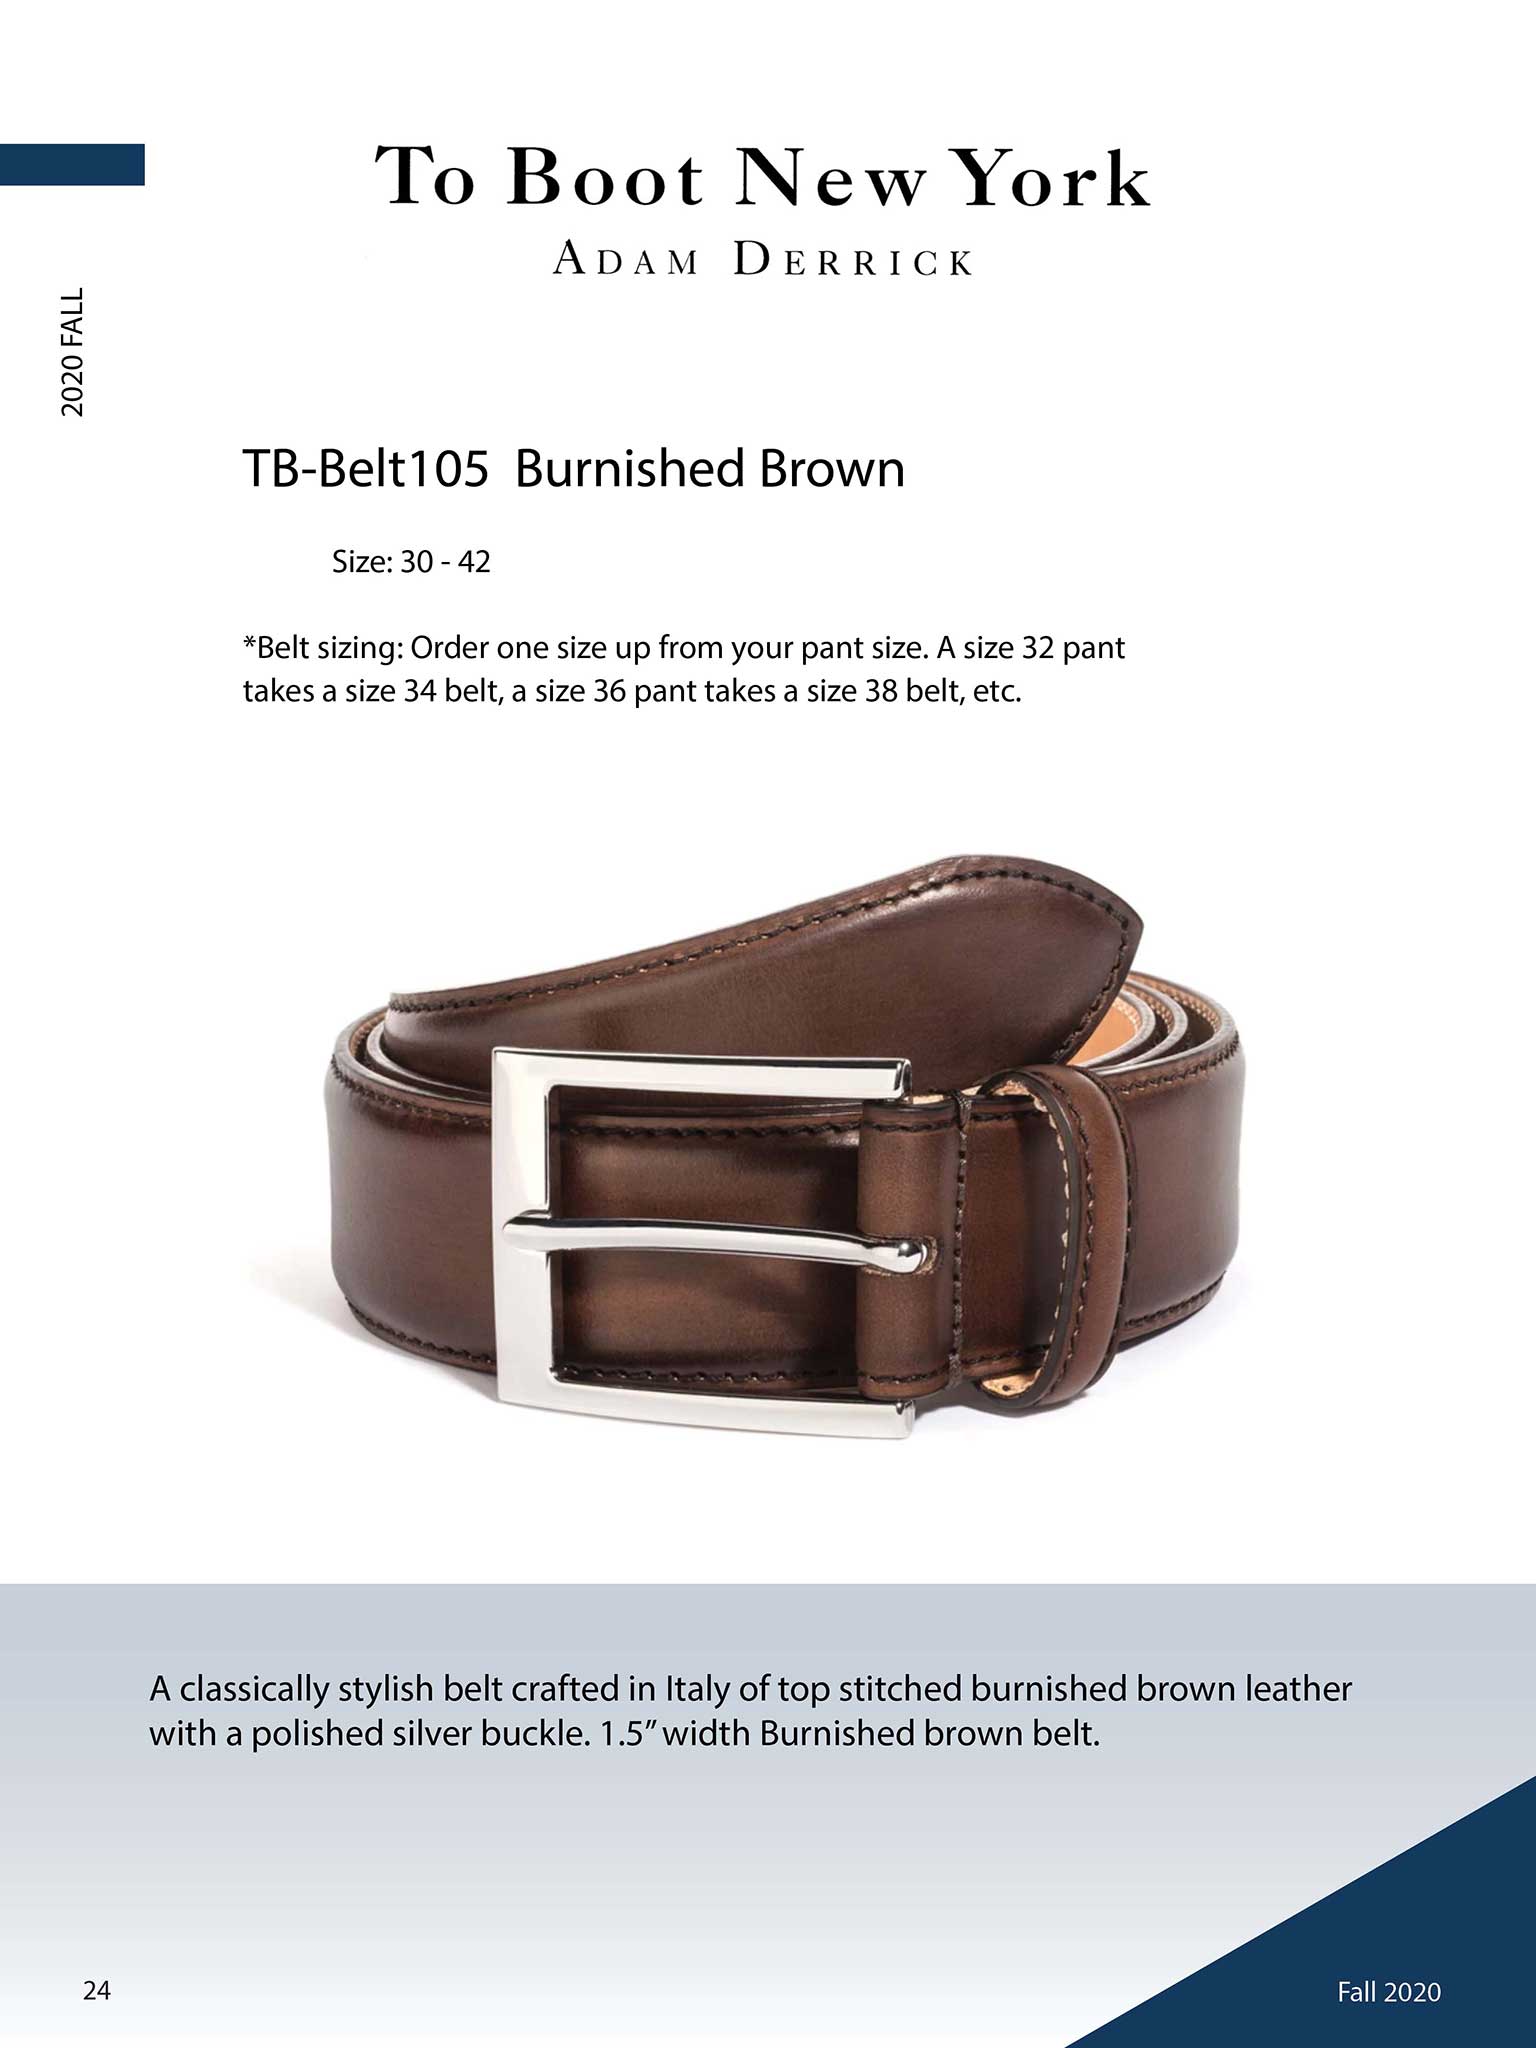 To Boot New York                                                                                                                                                                                                                                          , Burnished Brown Belt by To Boot New York